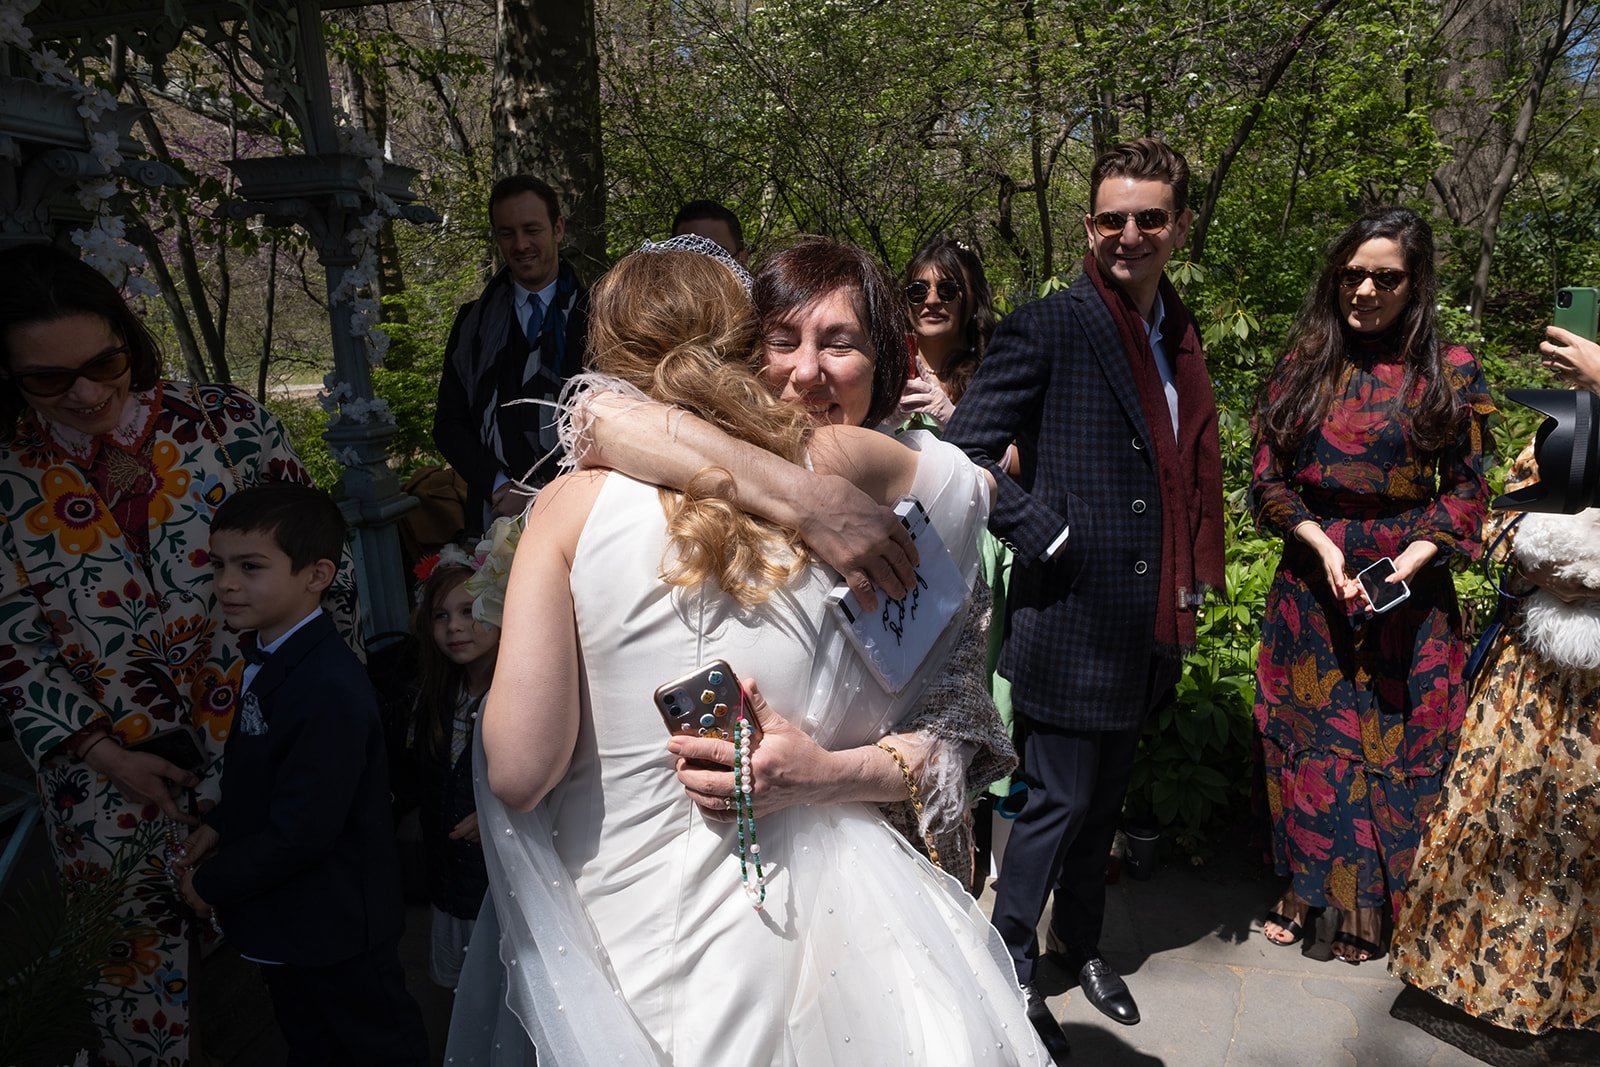 Candid wedding photography Central Park 3.jpg